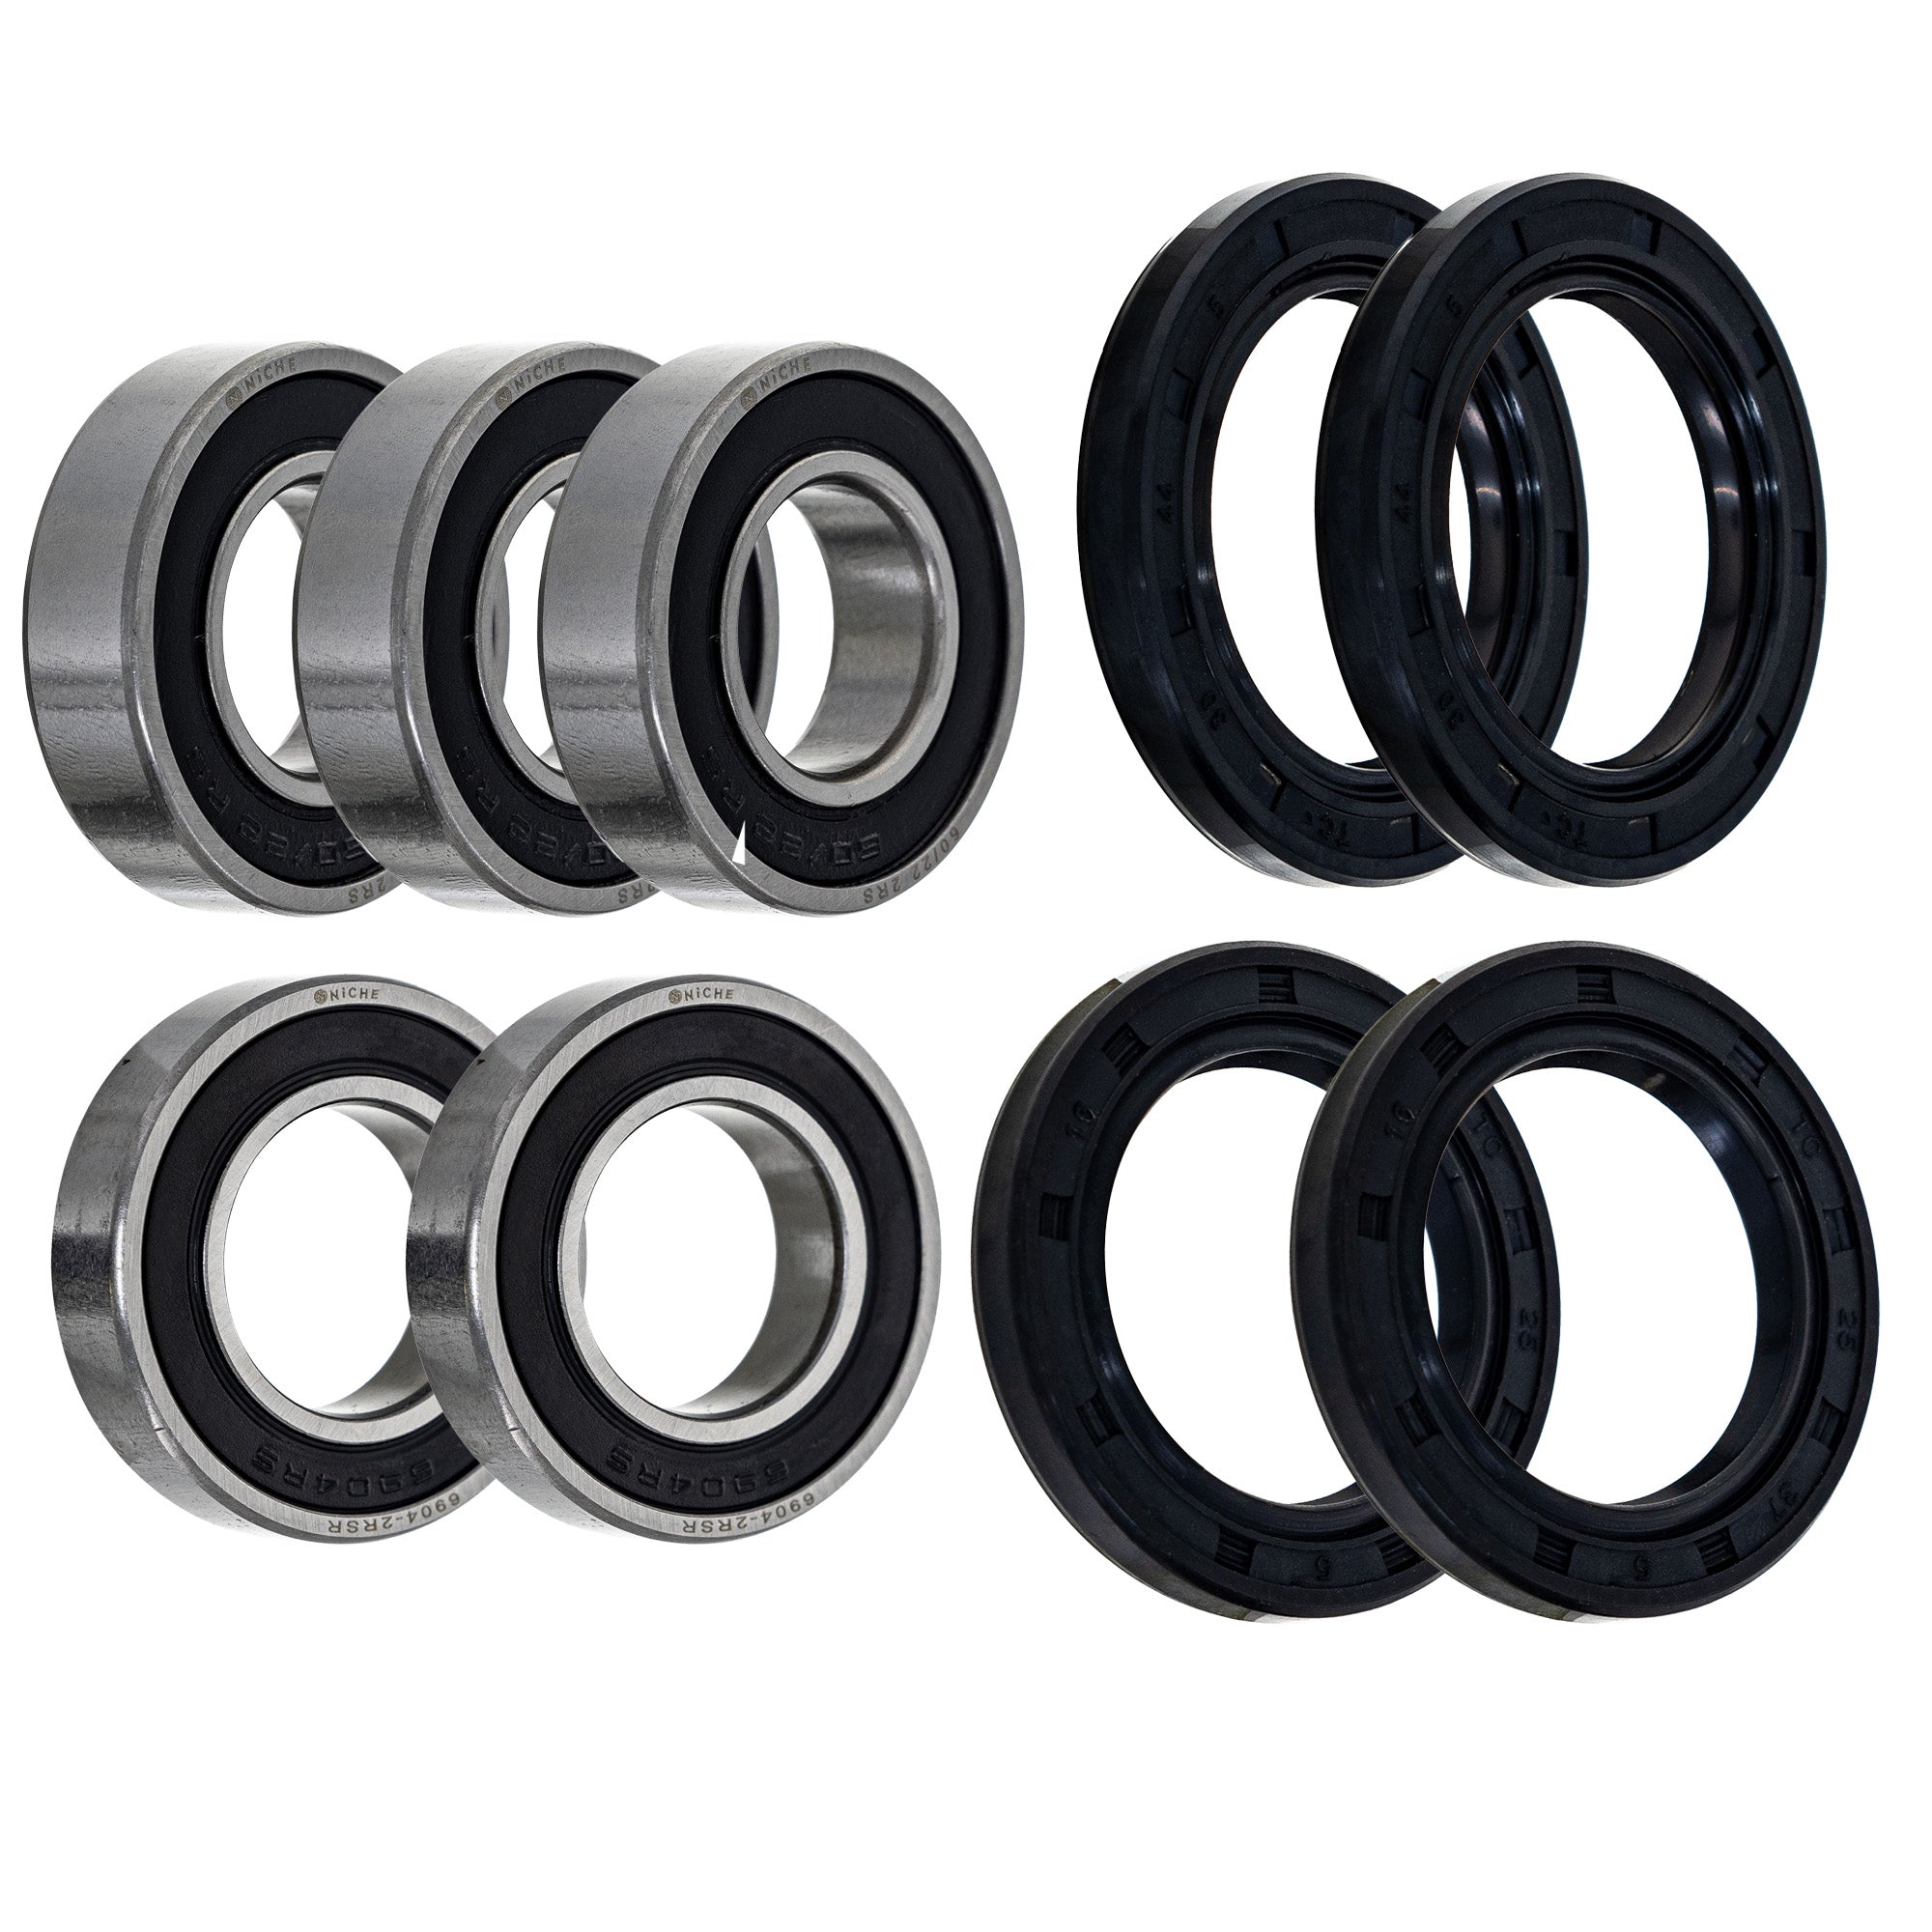 Wheel Bearing Seal Kit for zOTHER RM250 RM125 NICHE MK1008744